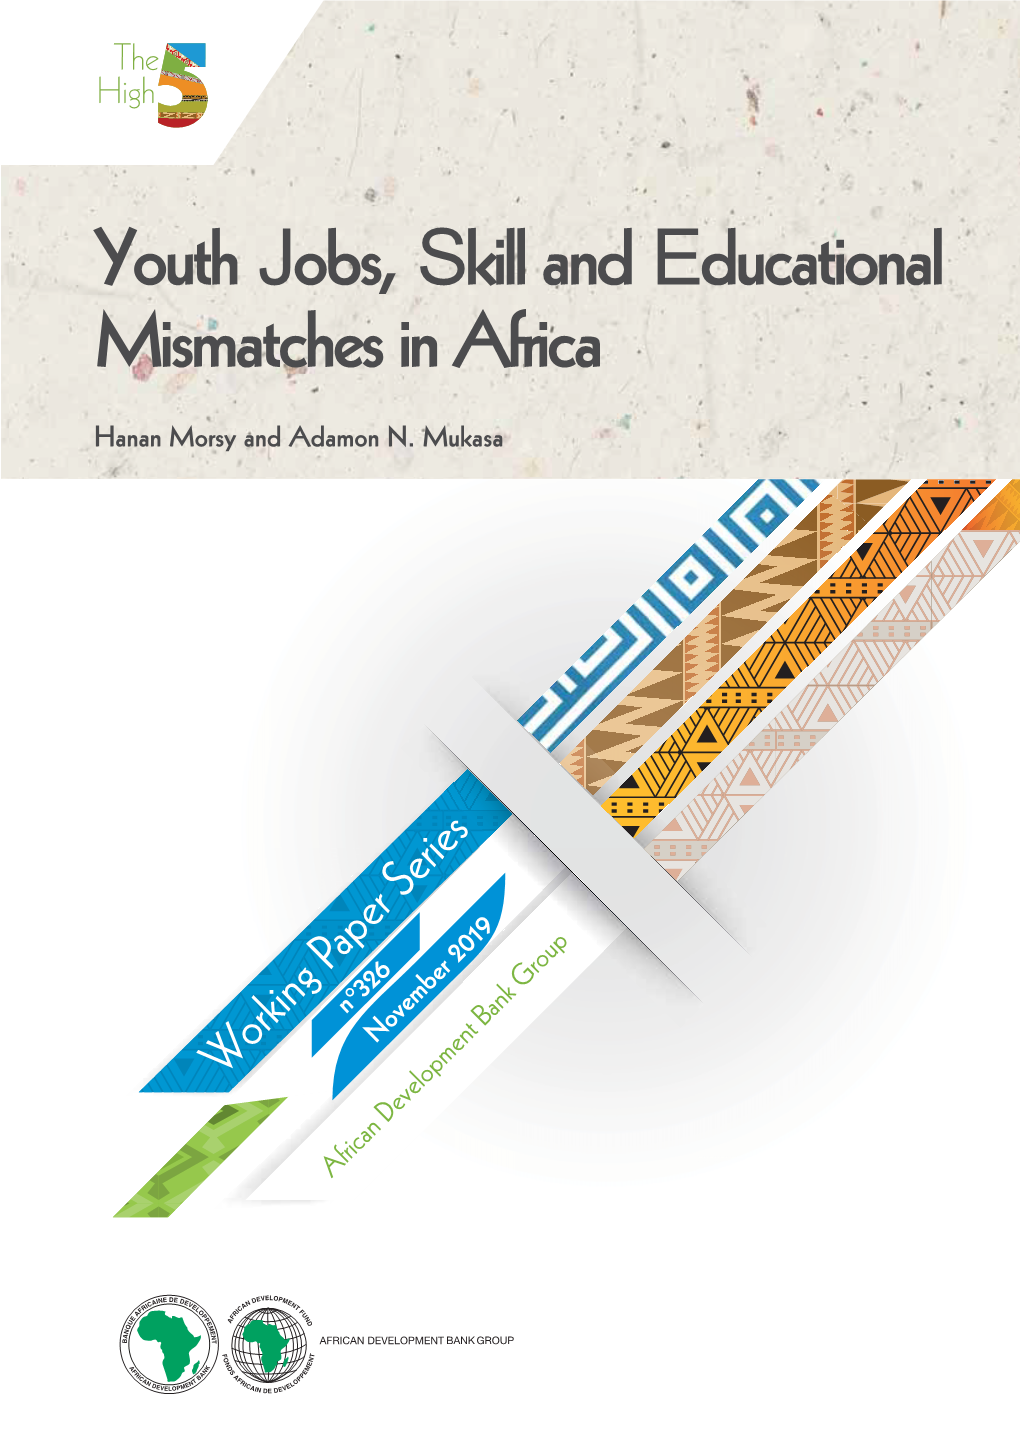 Youth Jobs, Skill and Educational Mismatches in Africa